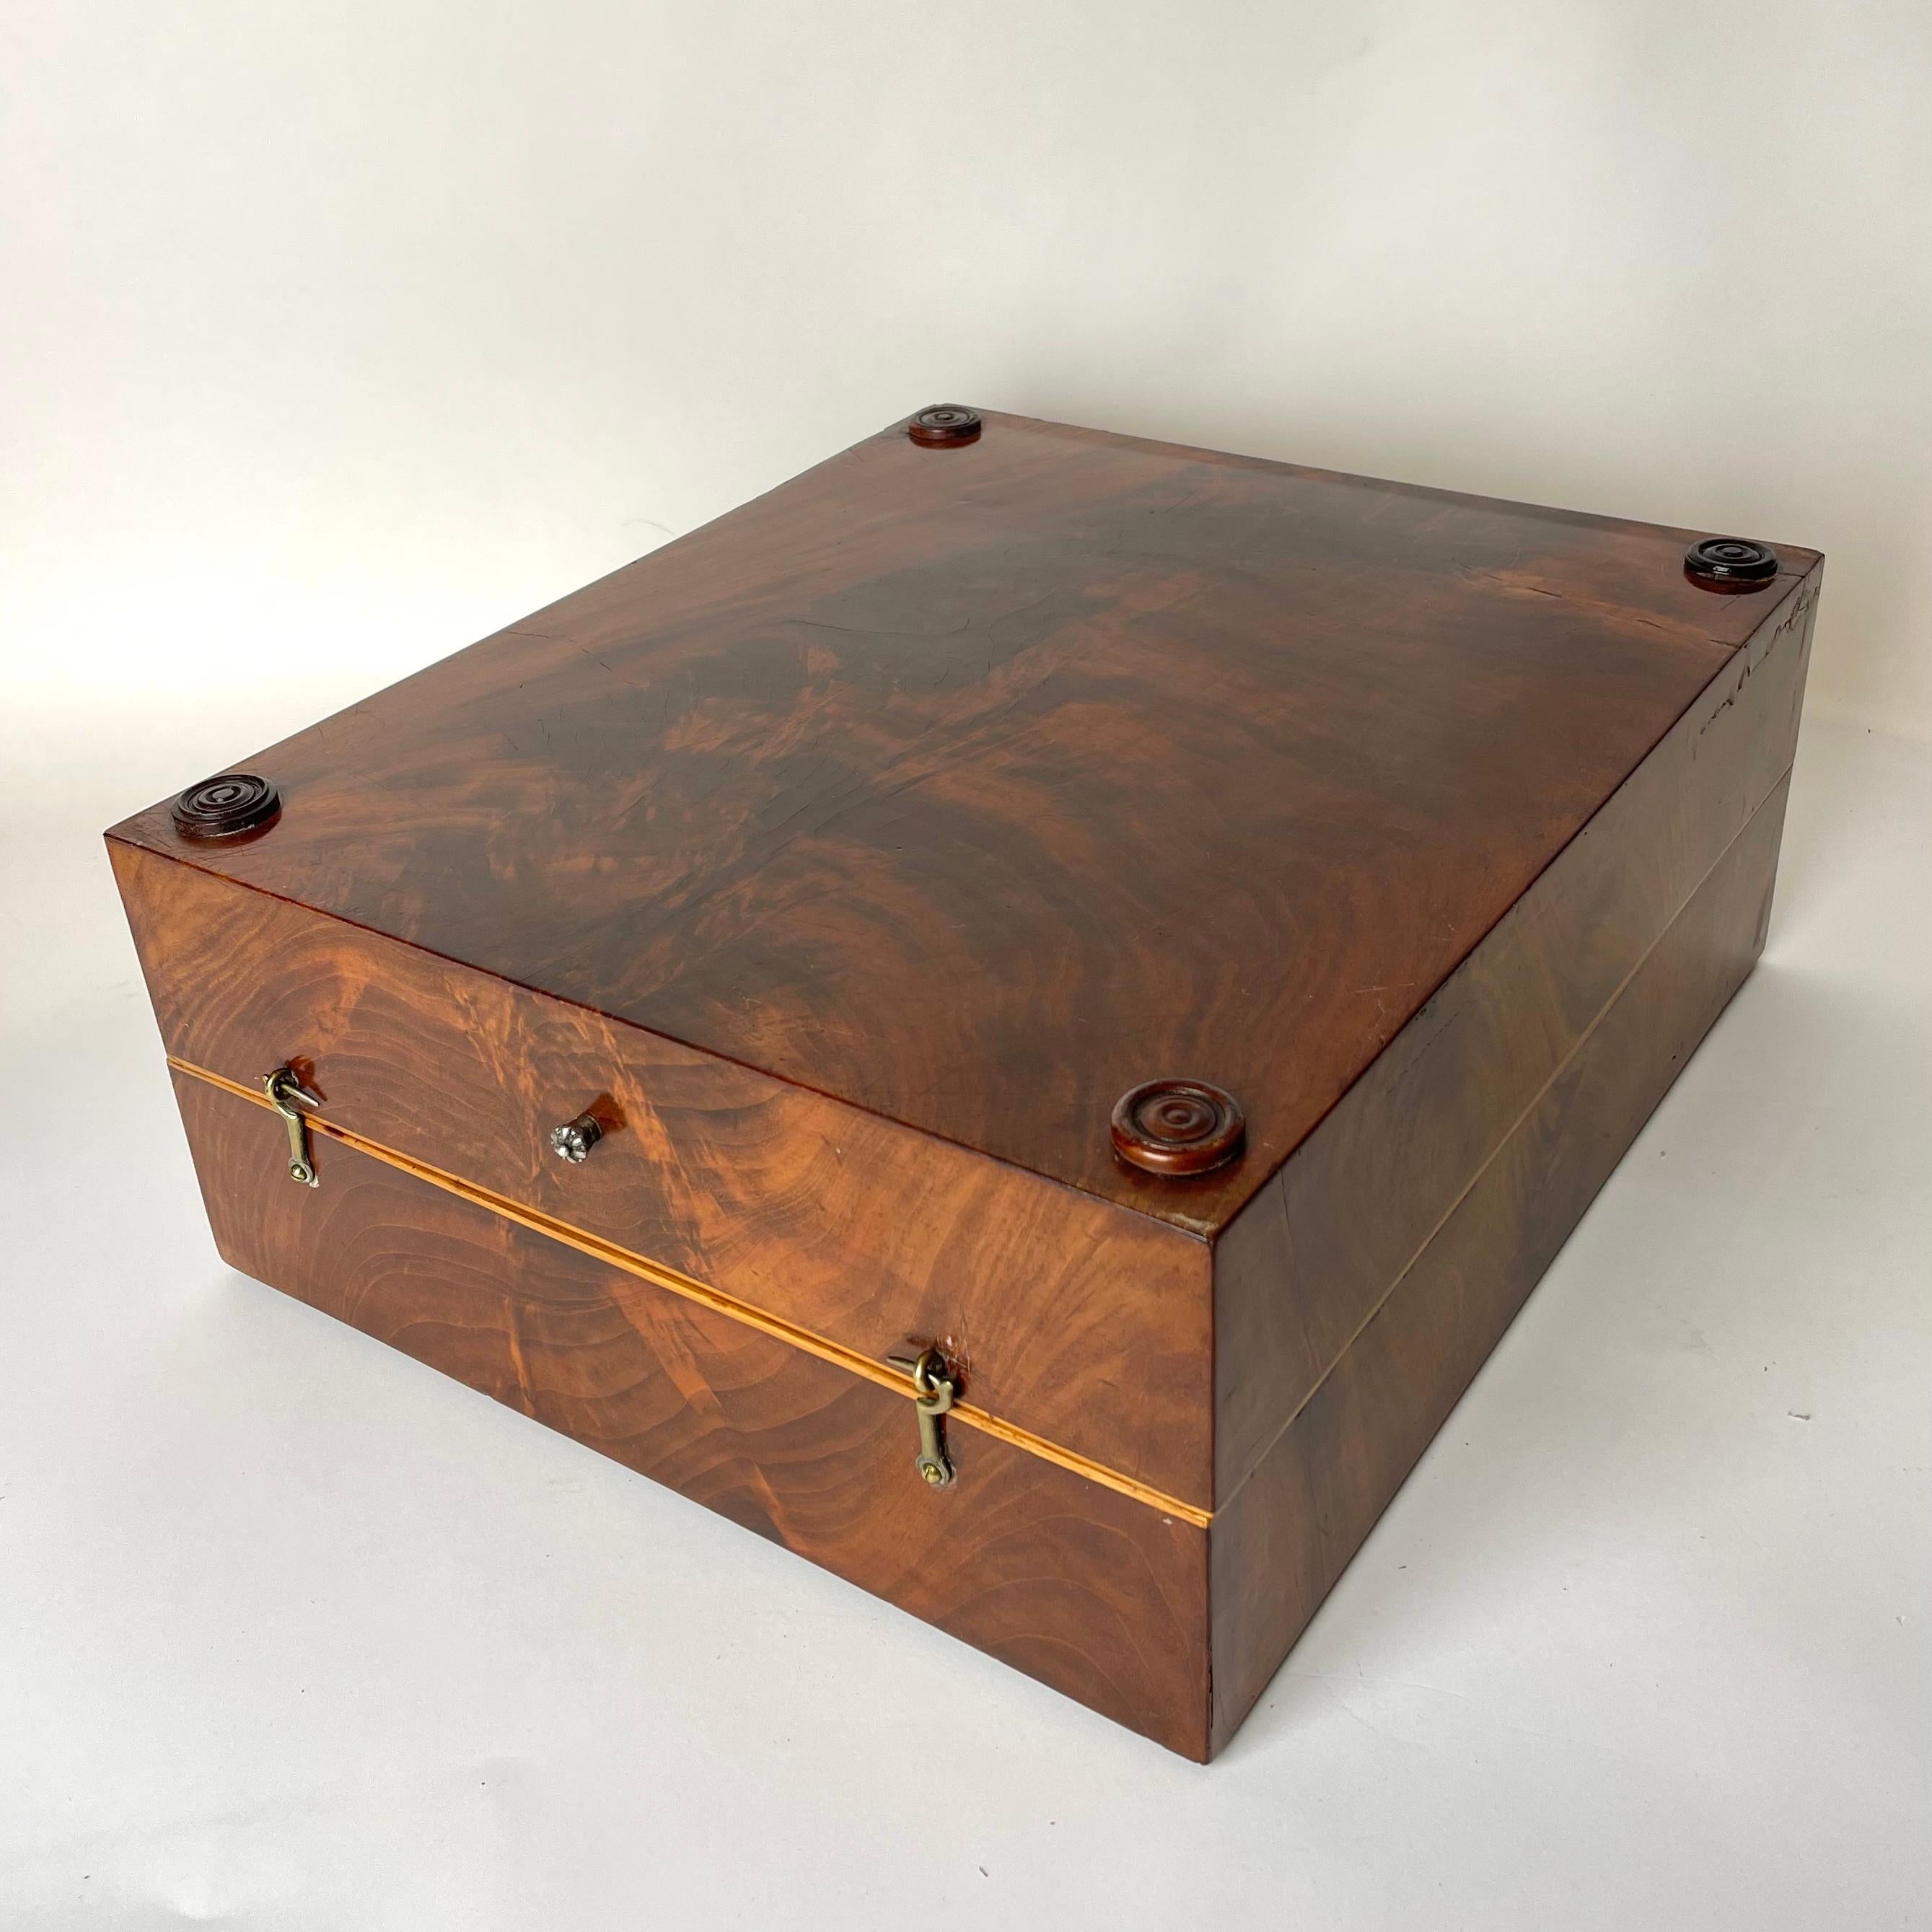 An Elegant Empire Backgammon Game Box in Mahogany (Swietenia Mahogani) with details in Hallmark Silver. Made in the early 19th Century.

This Games Box for Backgammon is the perfect decorative piece that is also complete with pieces for playing the